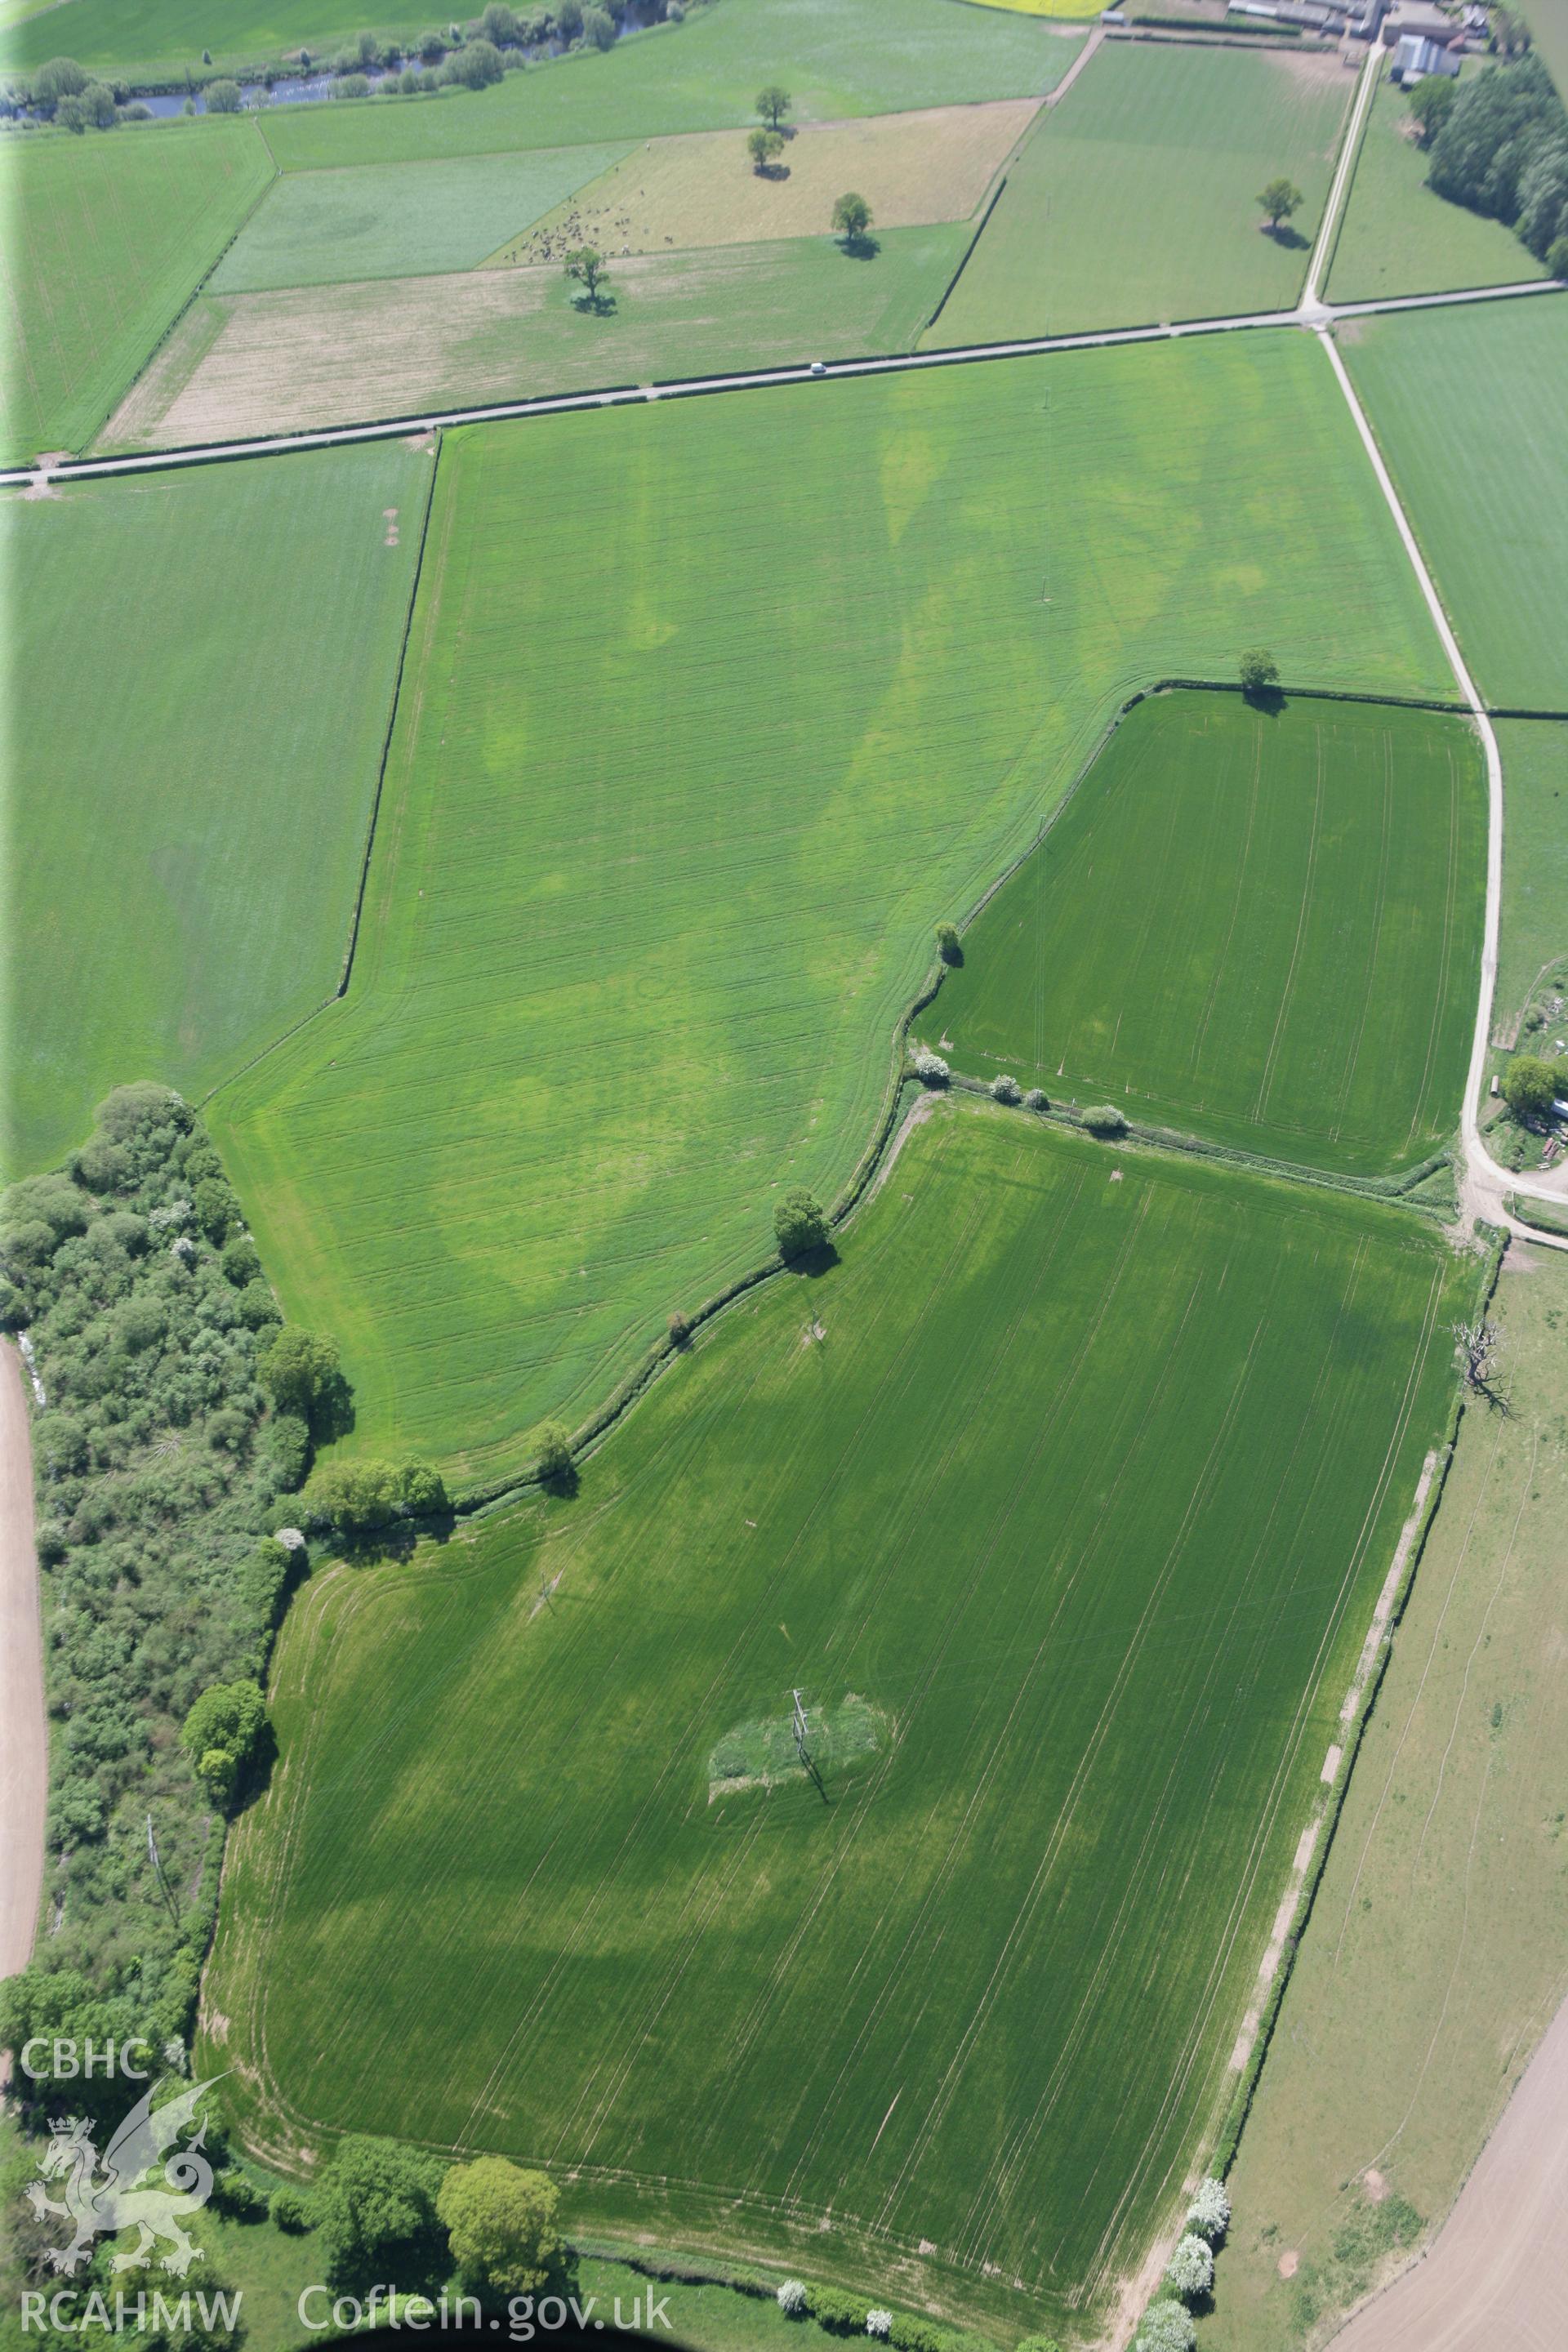 RCAHMW colour oblique photograph of Gerwyn-Fechan Round Barrow Cemetery. Taken by Toby Driver on 03/05/2011.